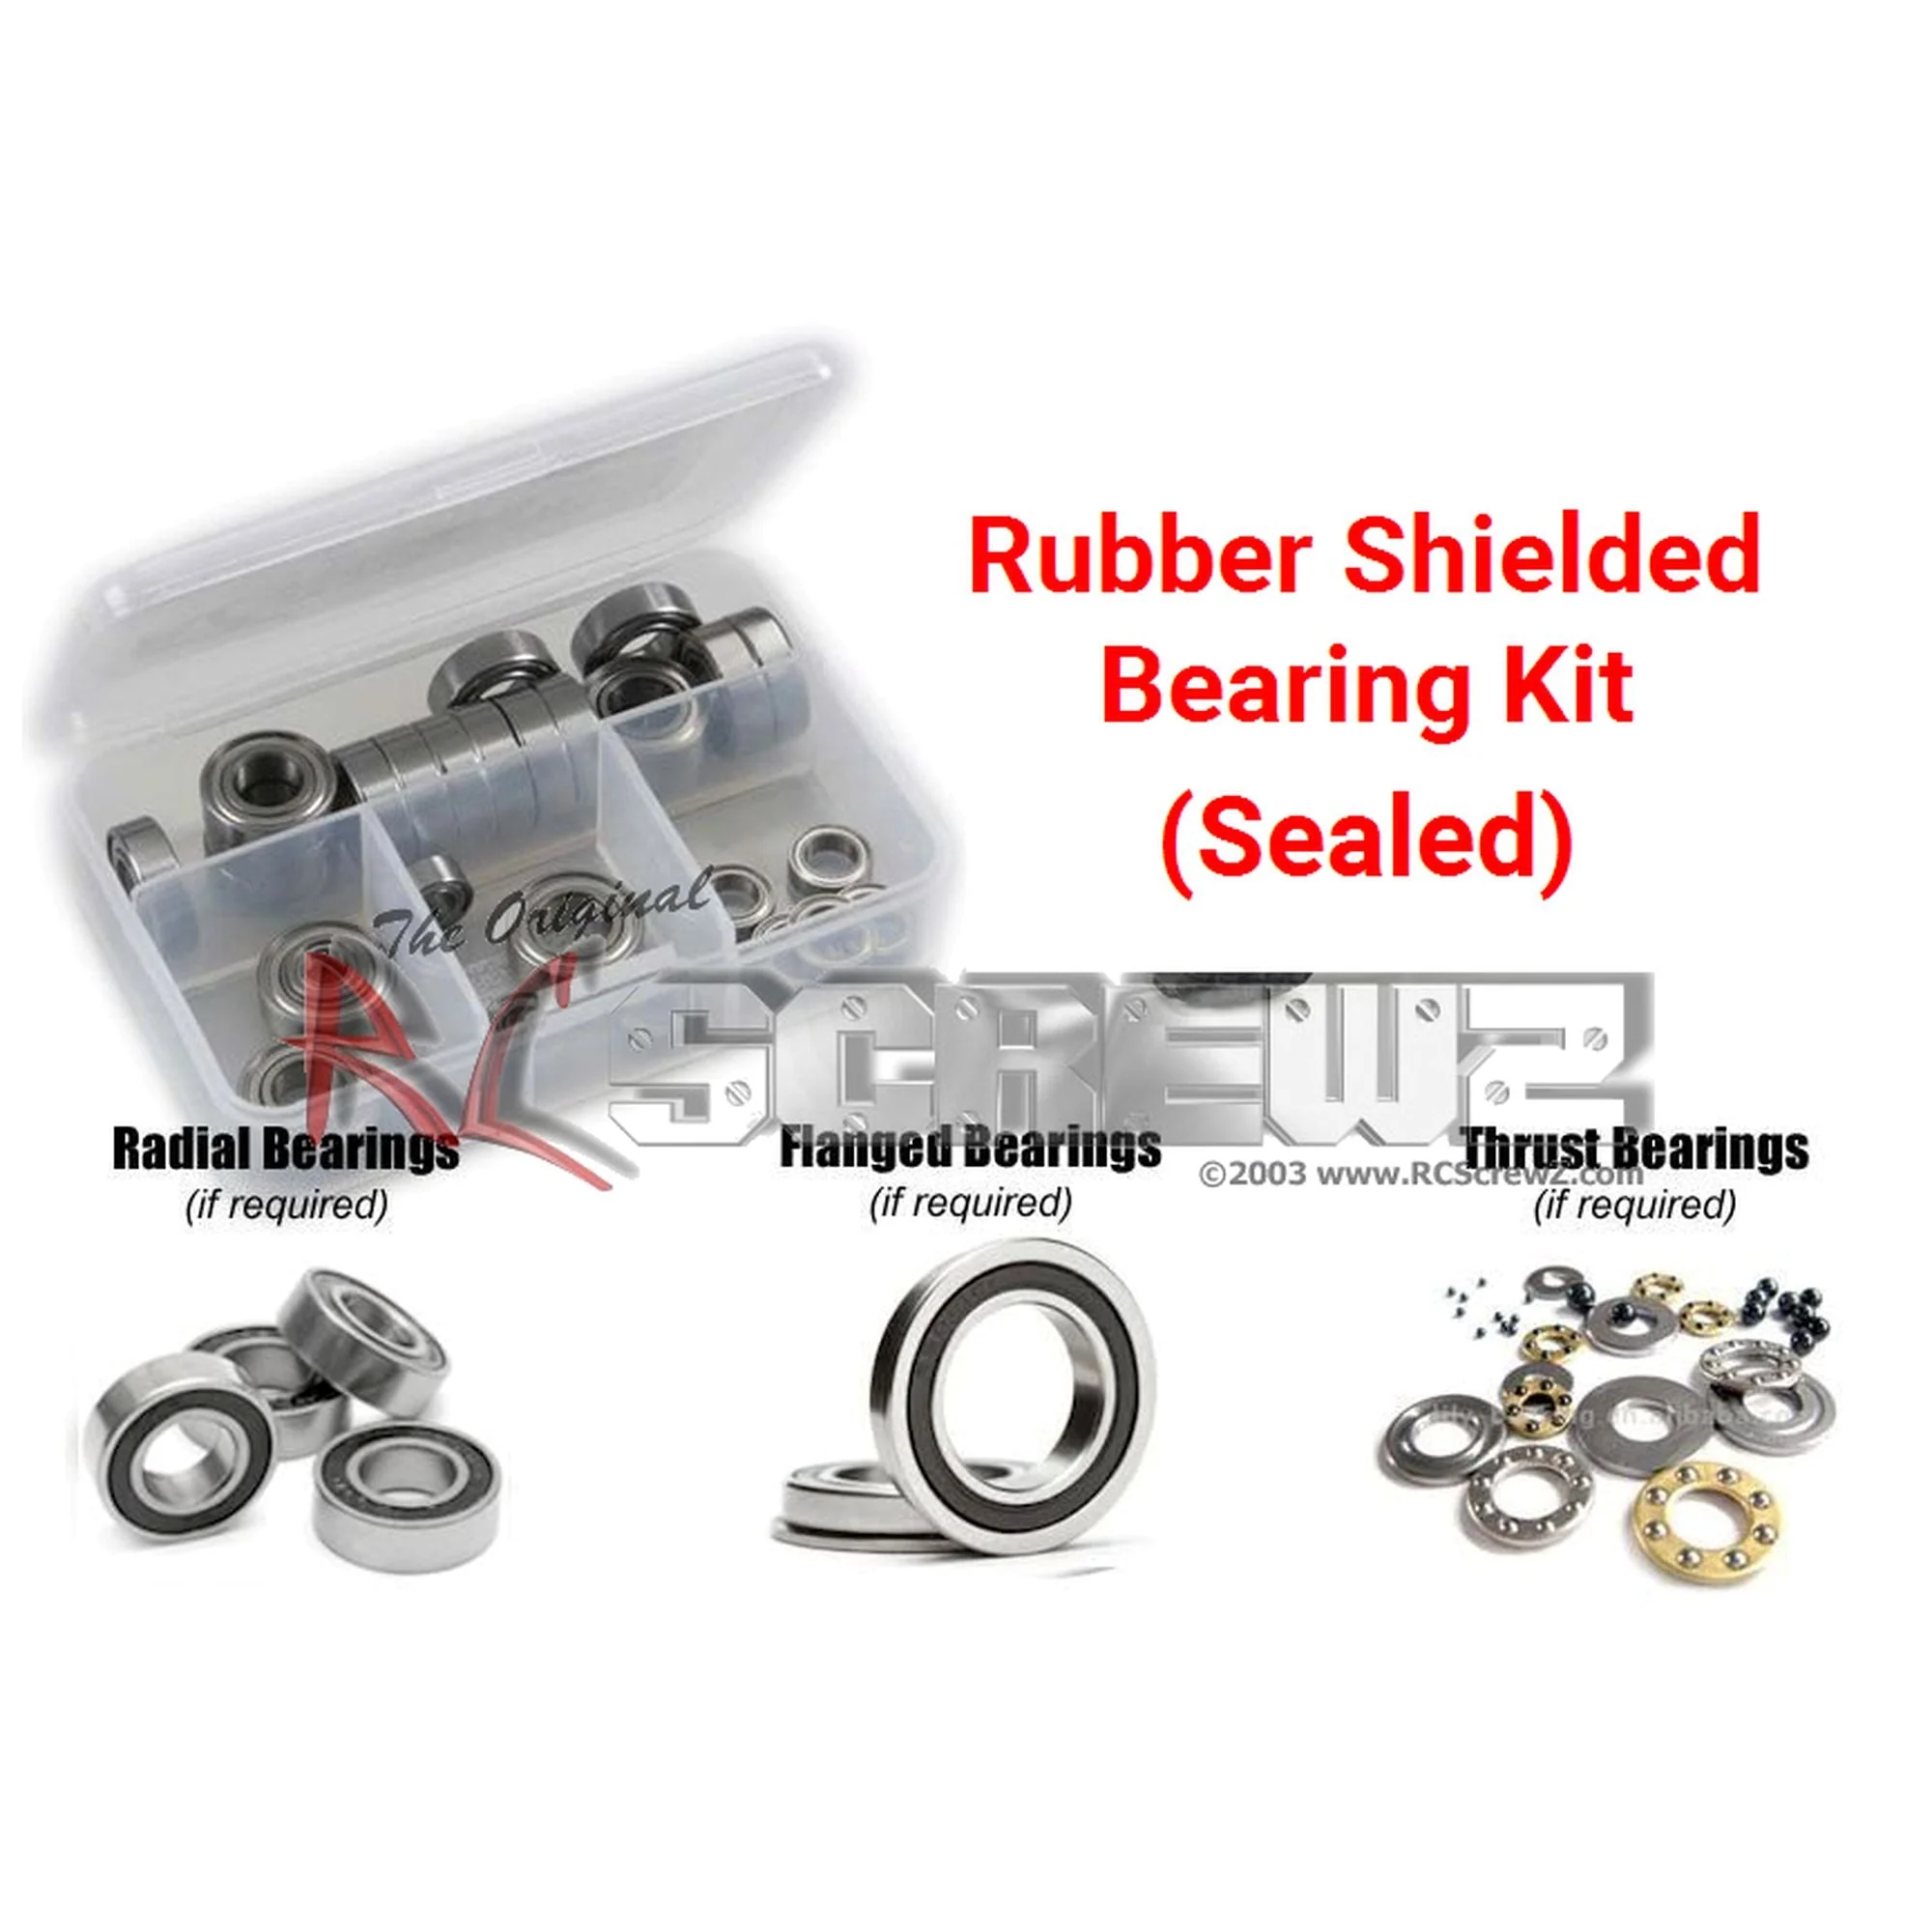 RCScrewZ Rubber Shielded Bearing Kit ser021r for Serpent 733 1/10 #804000 - Picture 1 of 12